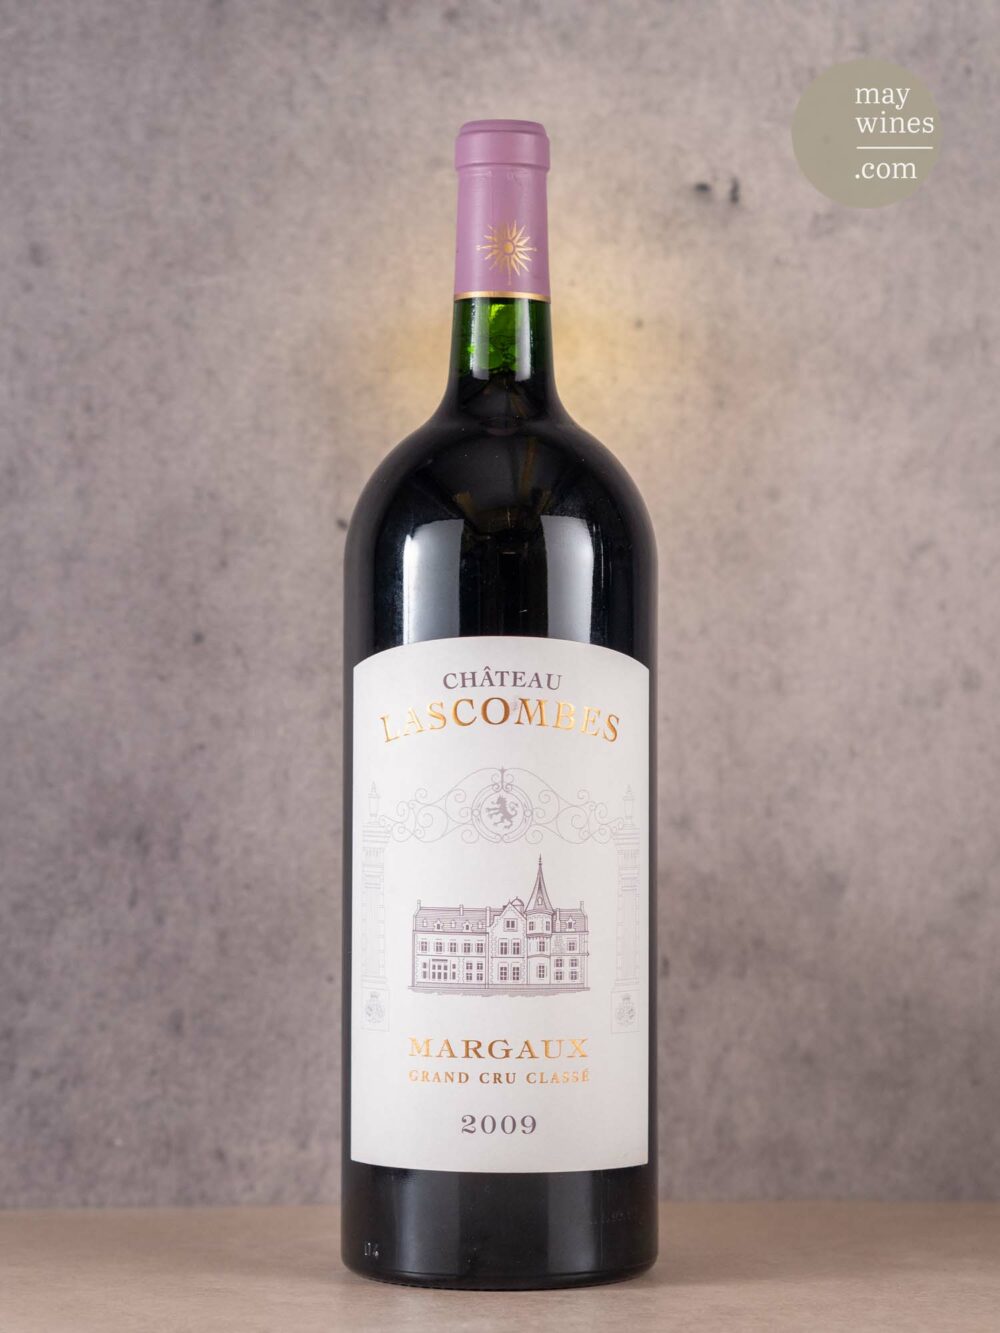 May Wines – Rotwein – 2009 Château Lascombes